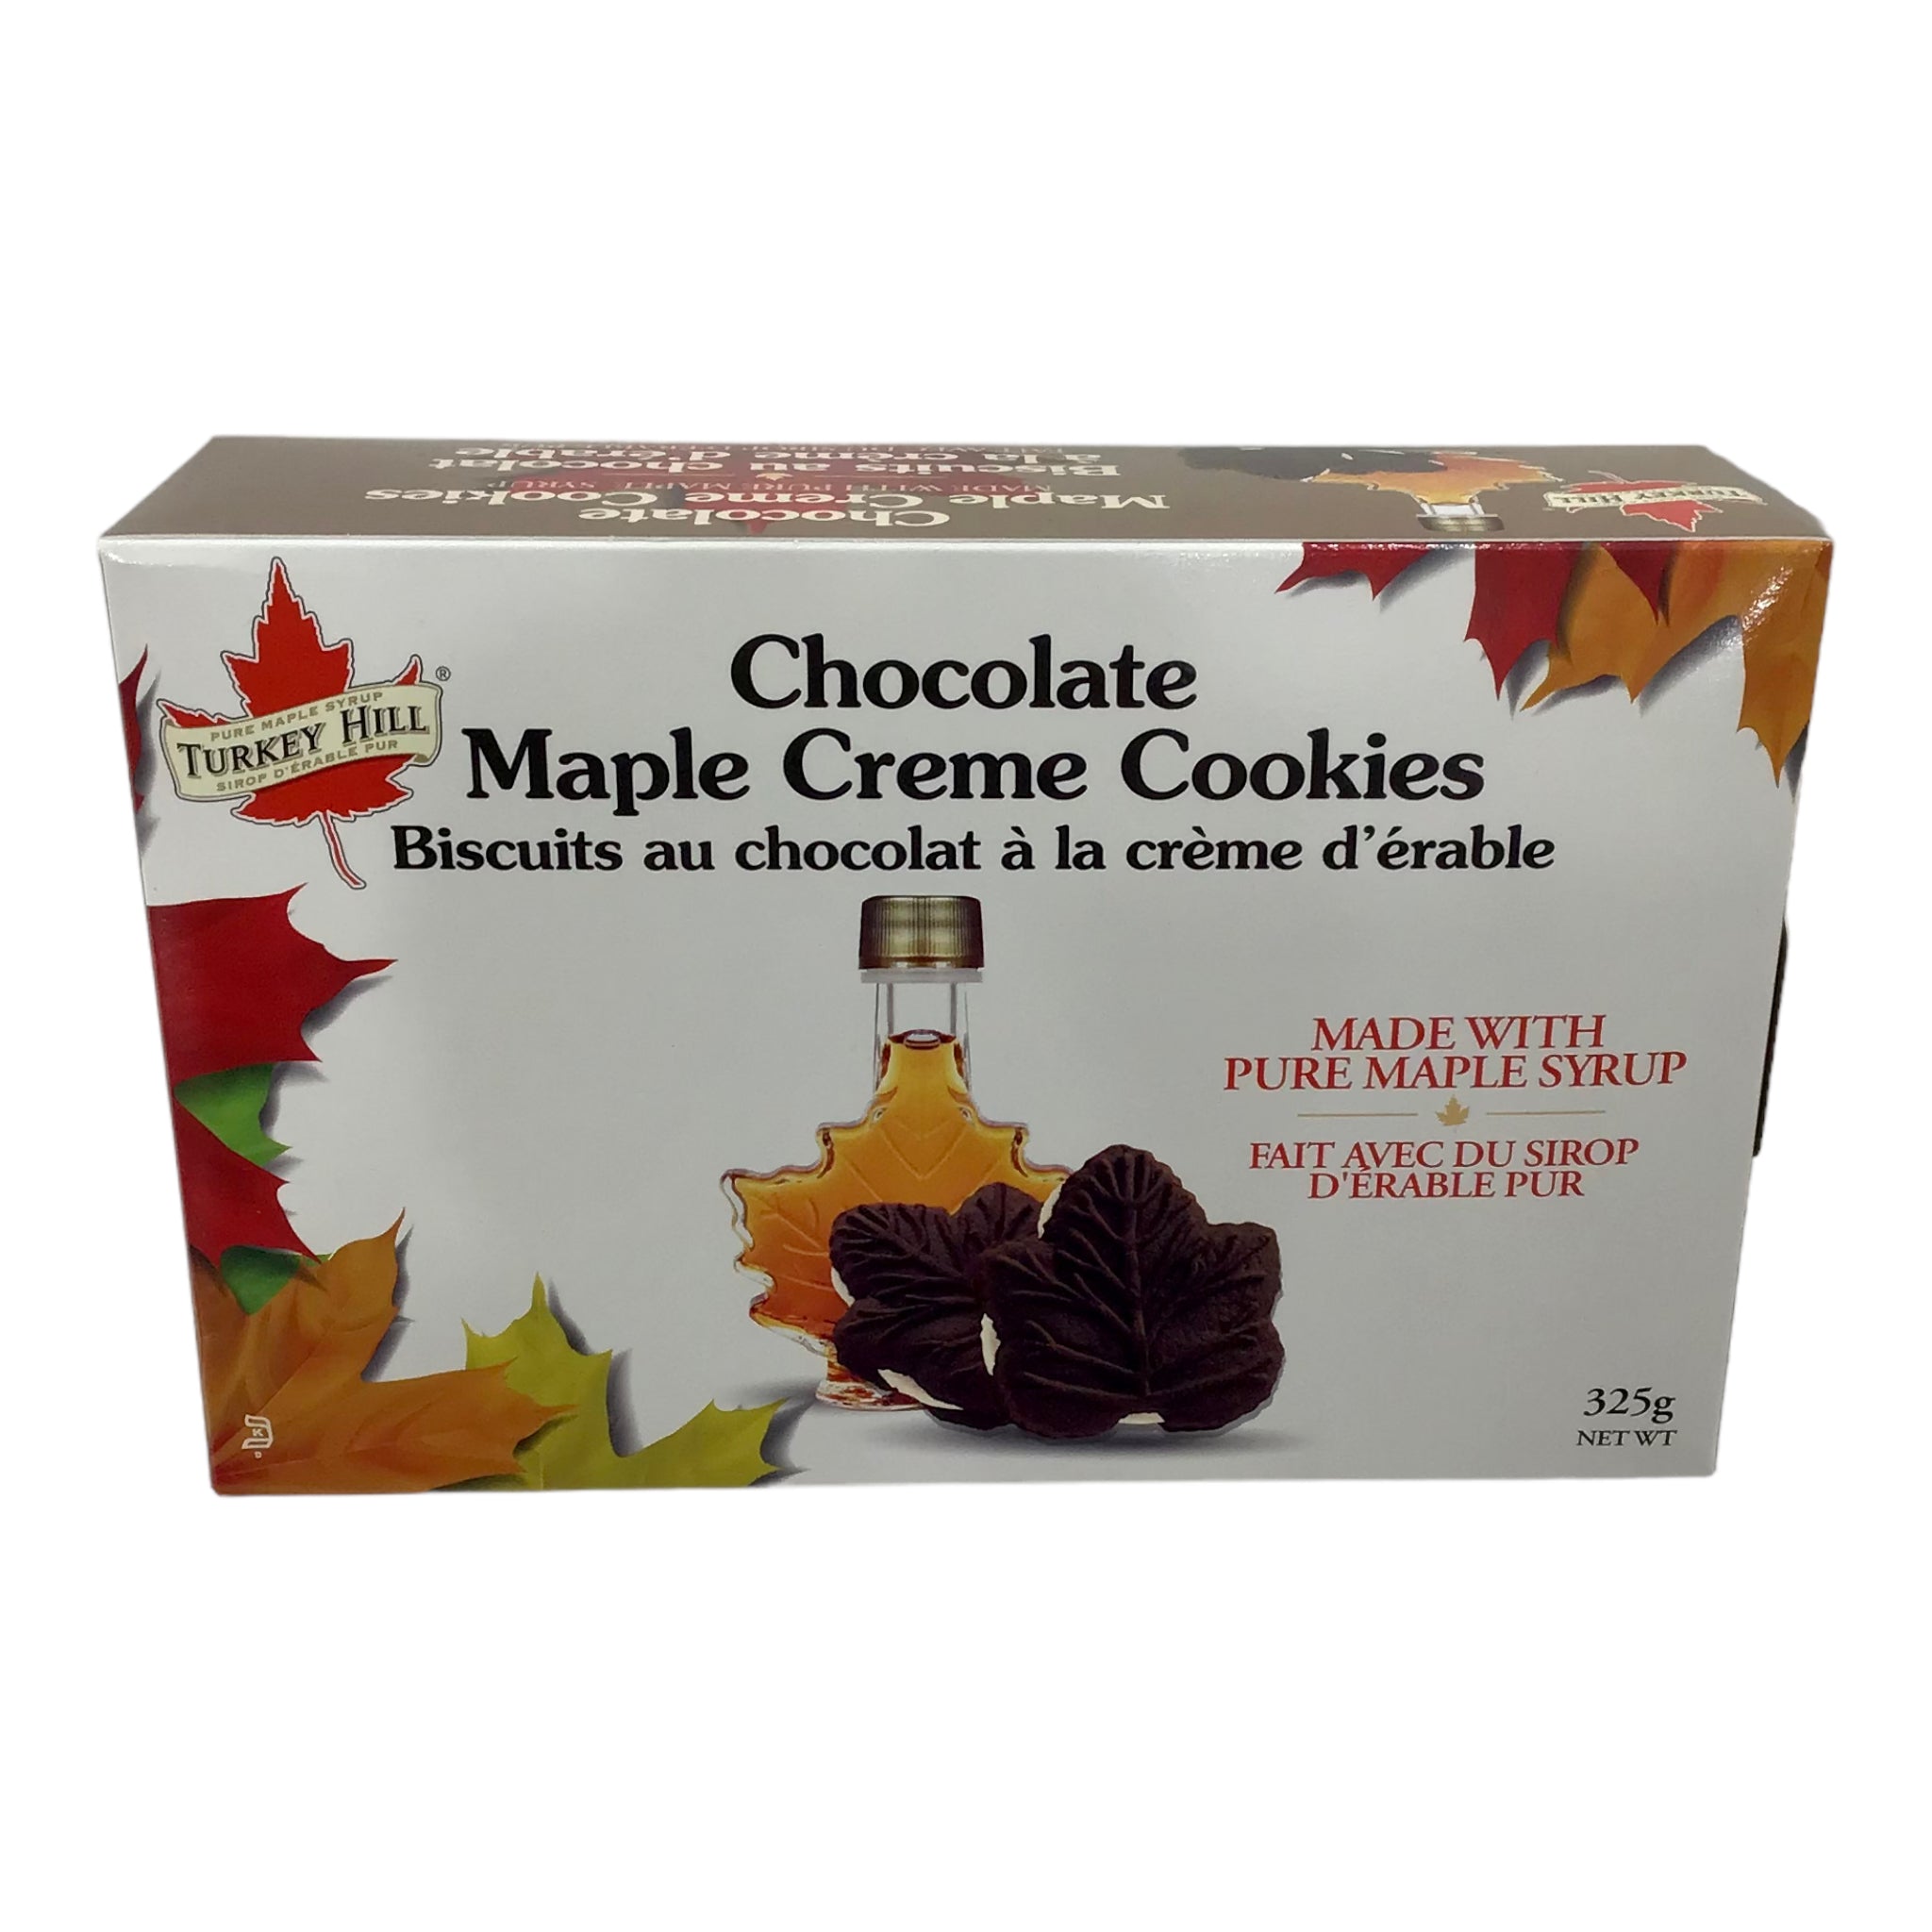 CANADA MAPLE SYRUP CHOCOLATE CREAM COOKIES 325g Package